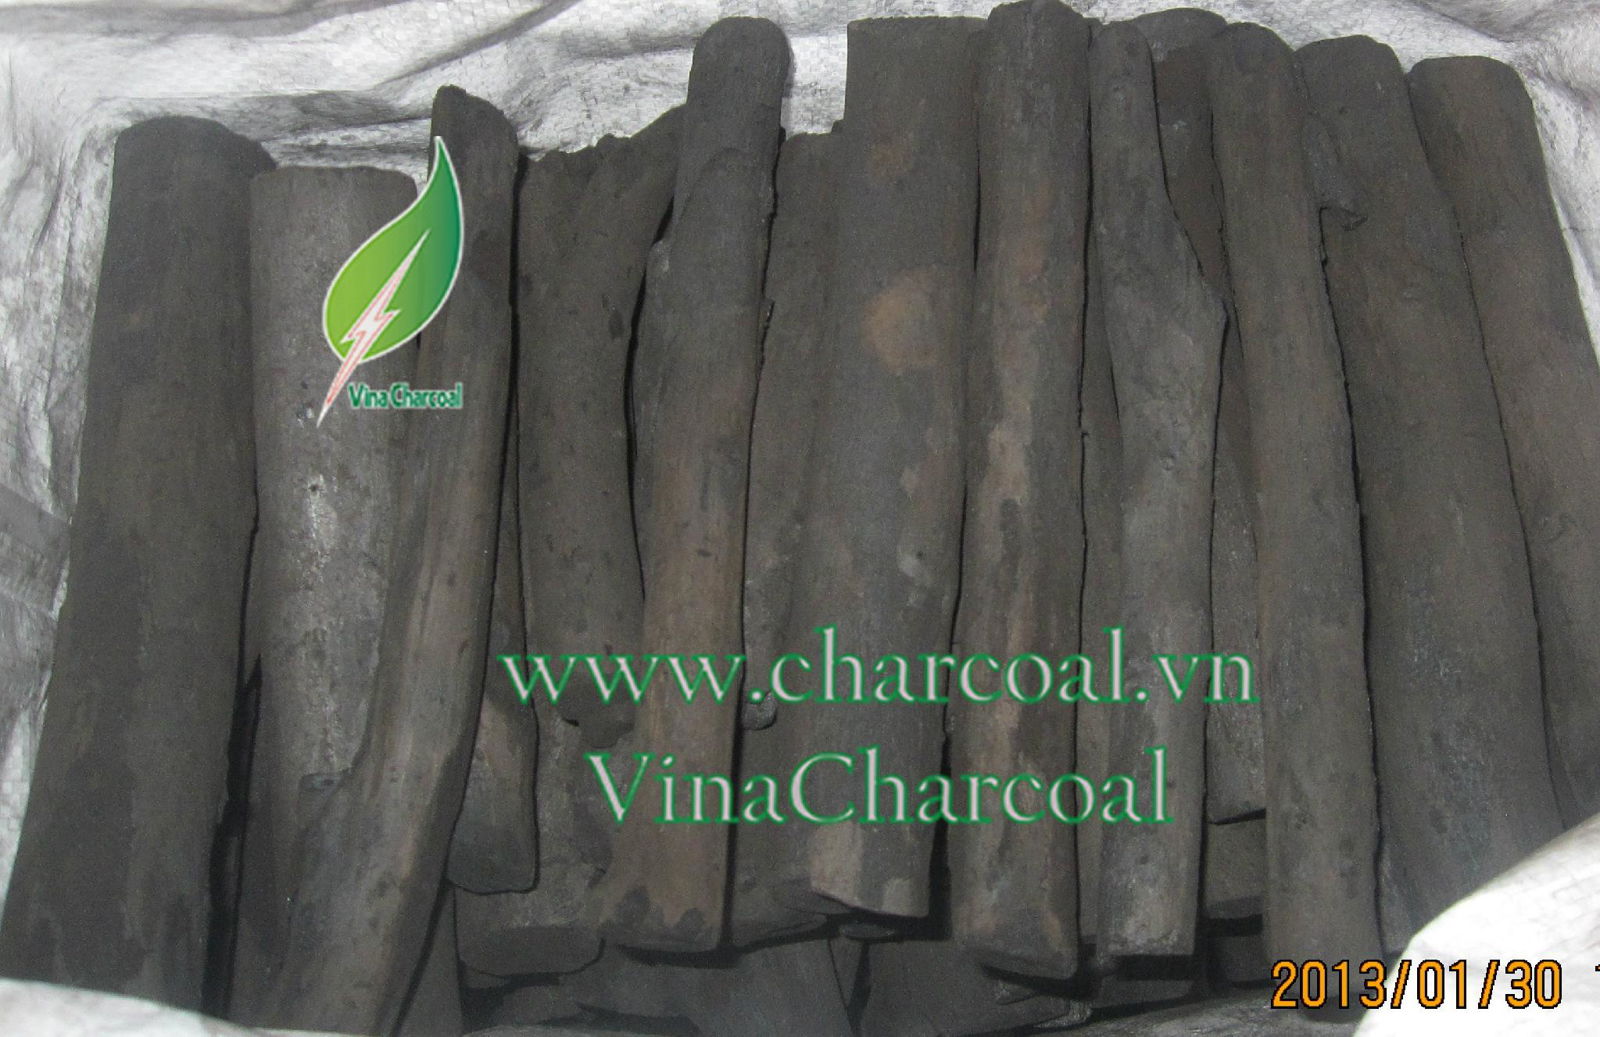 Low Ash Good Price Pomelo Softwood Charcoal  5